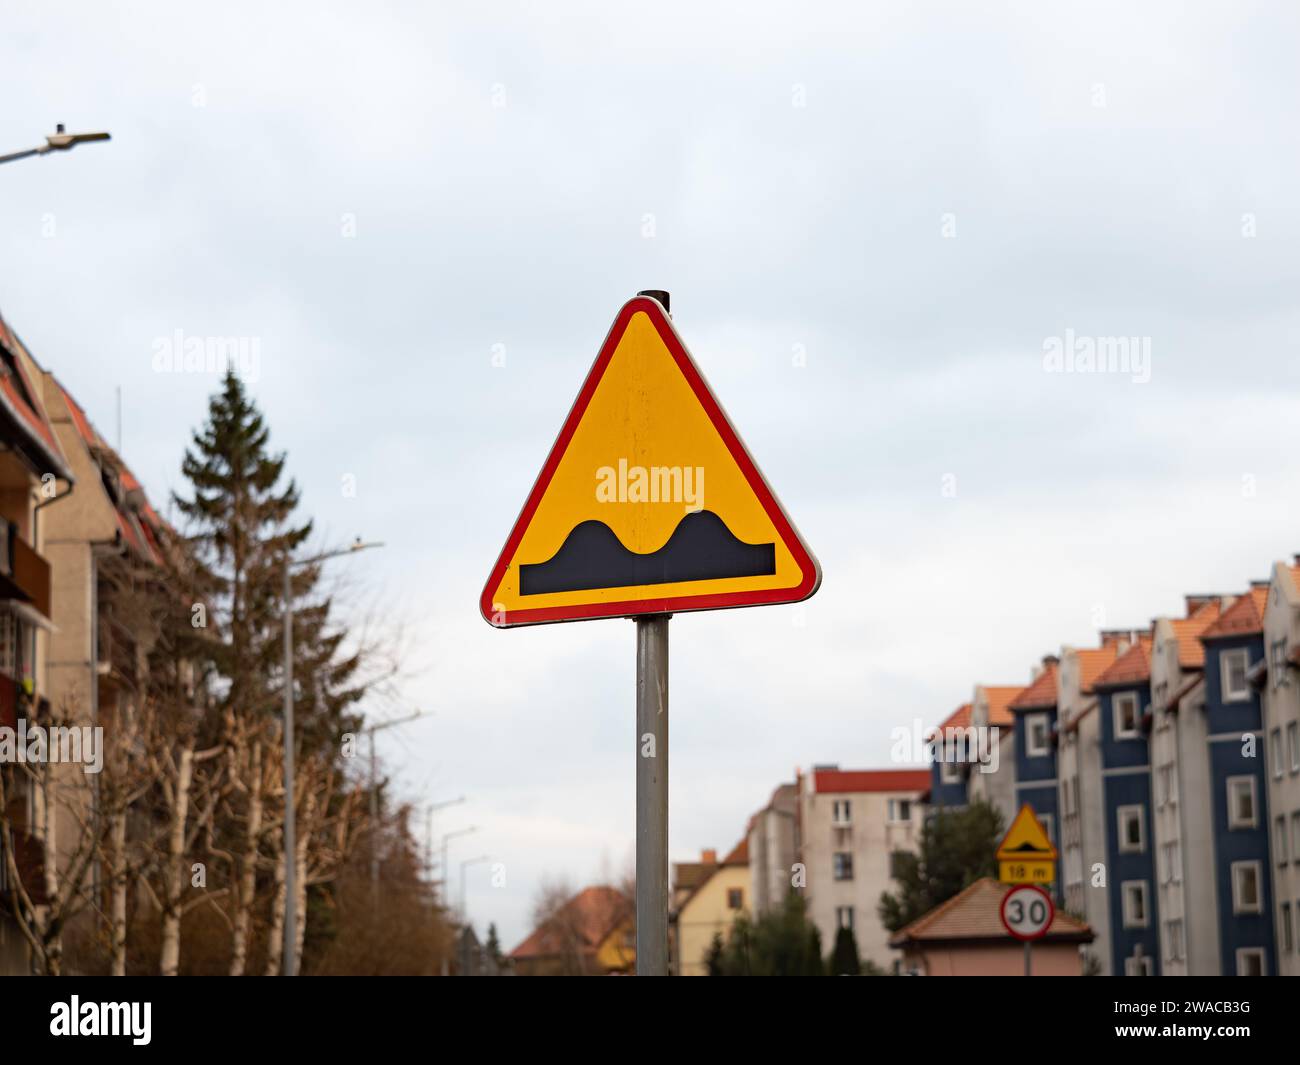 Bumpy road sign in Poland. Drive with caution because of a bad street condition and dangerous circumstances for traffic users or speed ramps. Stock Photo